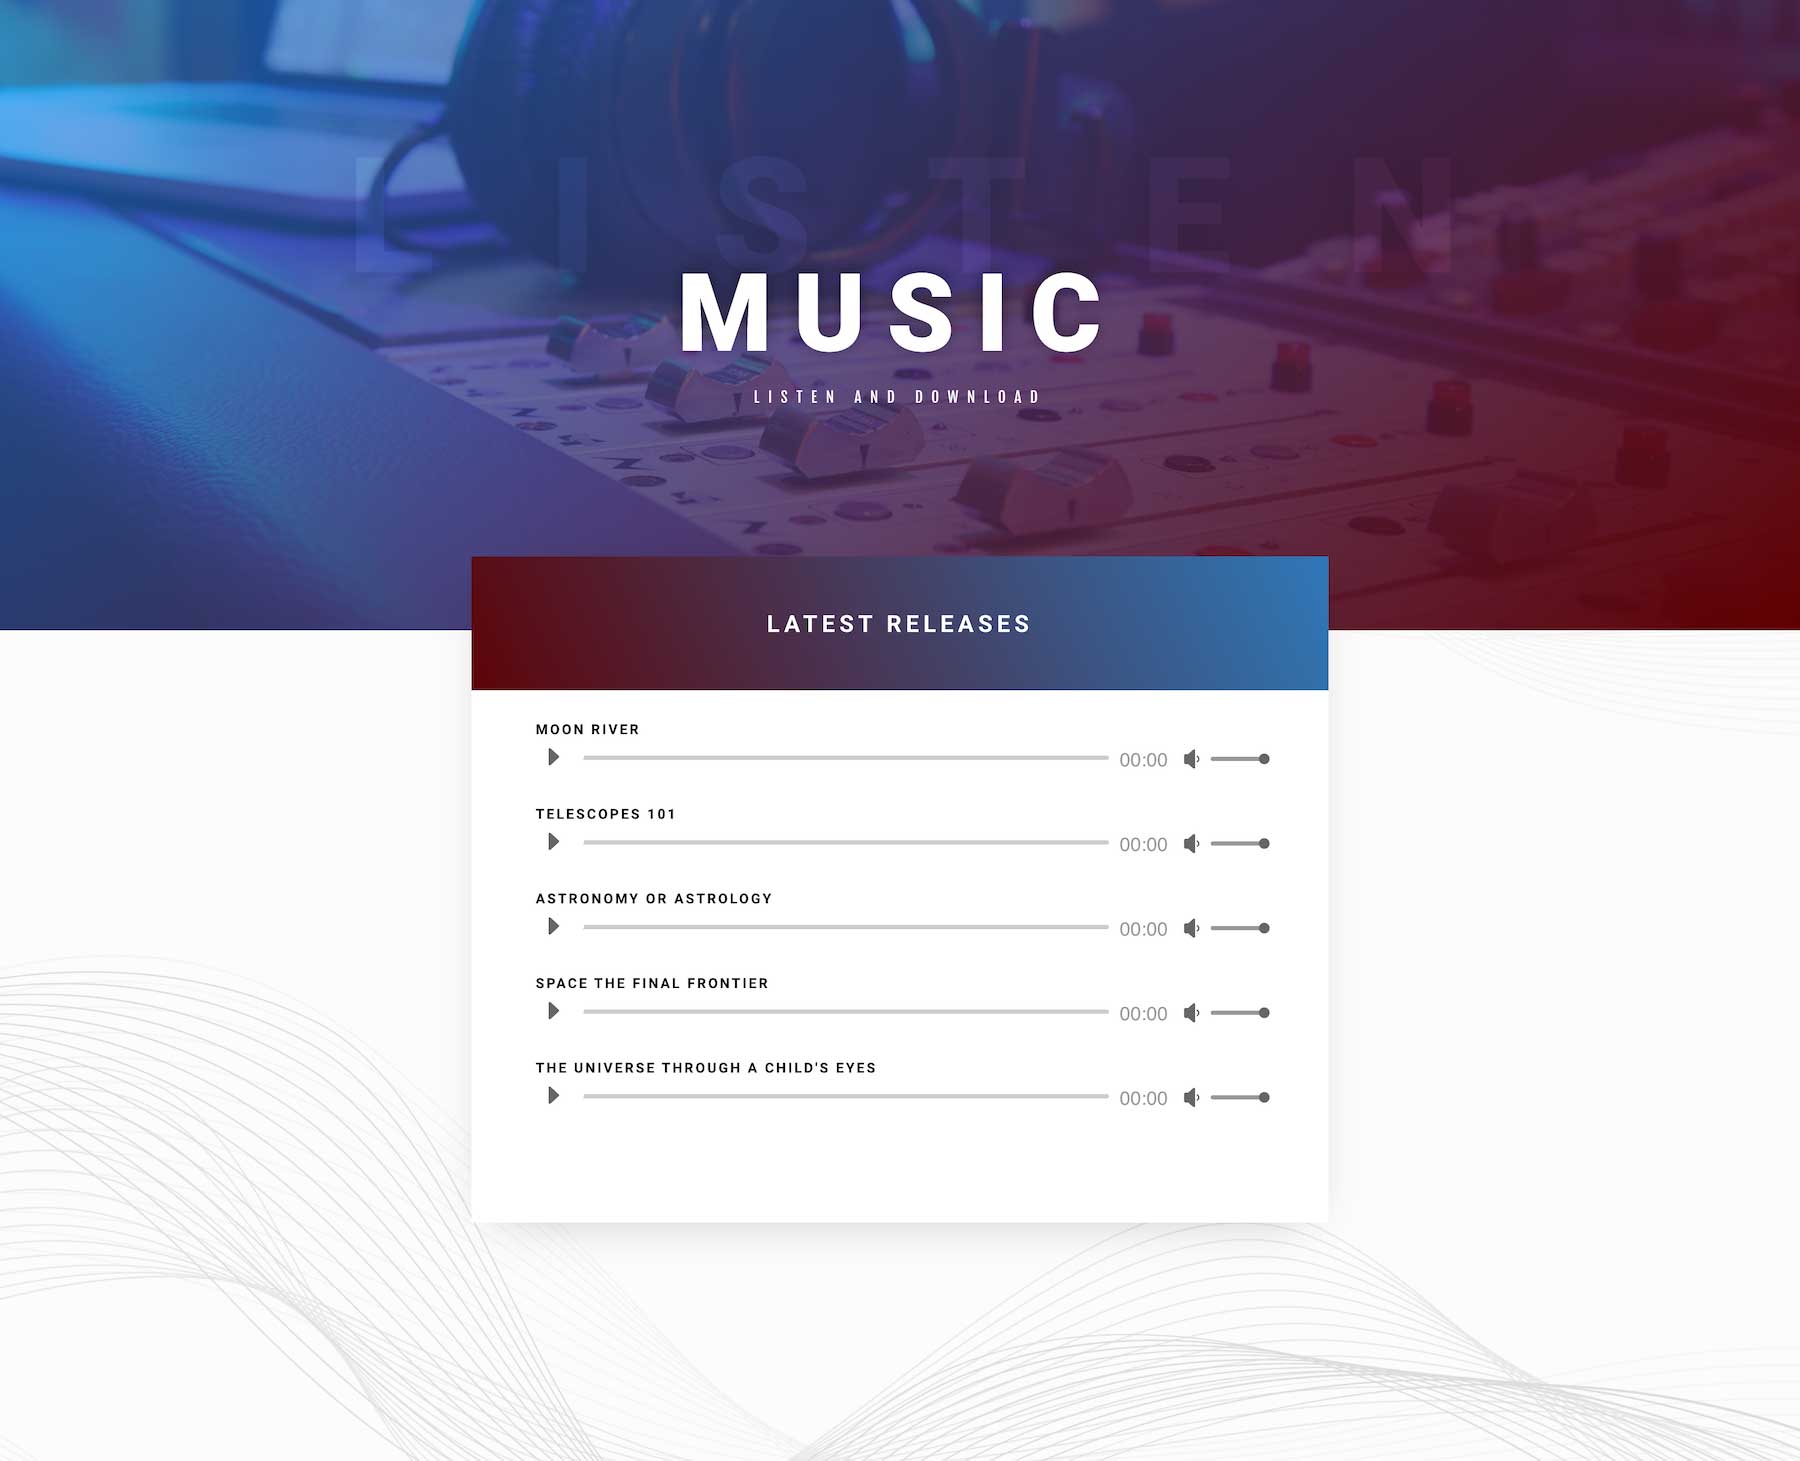 Music Player Ex Download - A lightweight music player using the